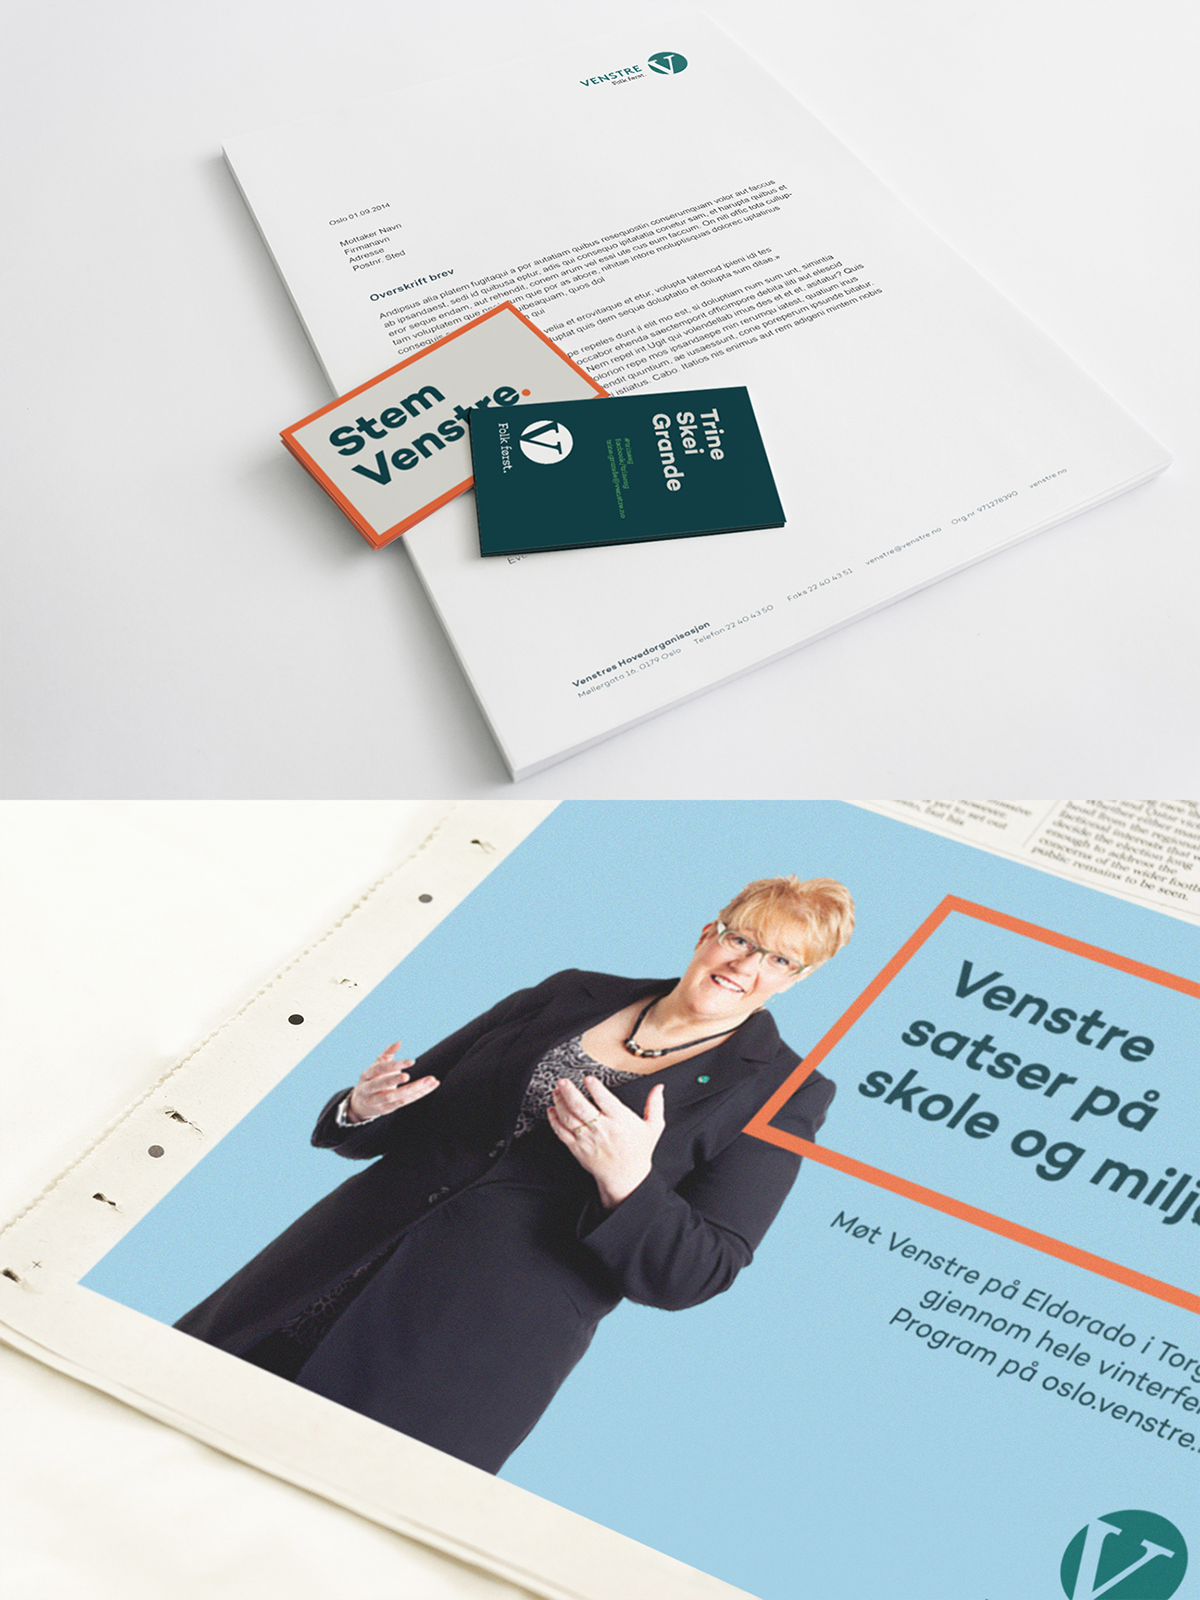 visual identity political party norway http://www.venstre.no/english/ liberal party norway